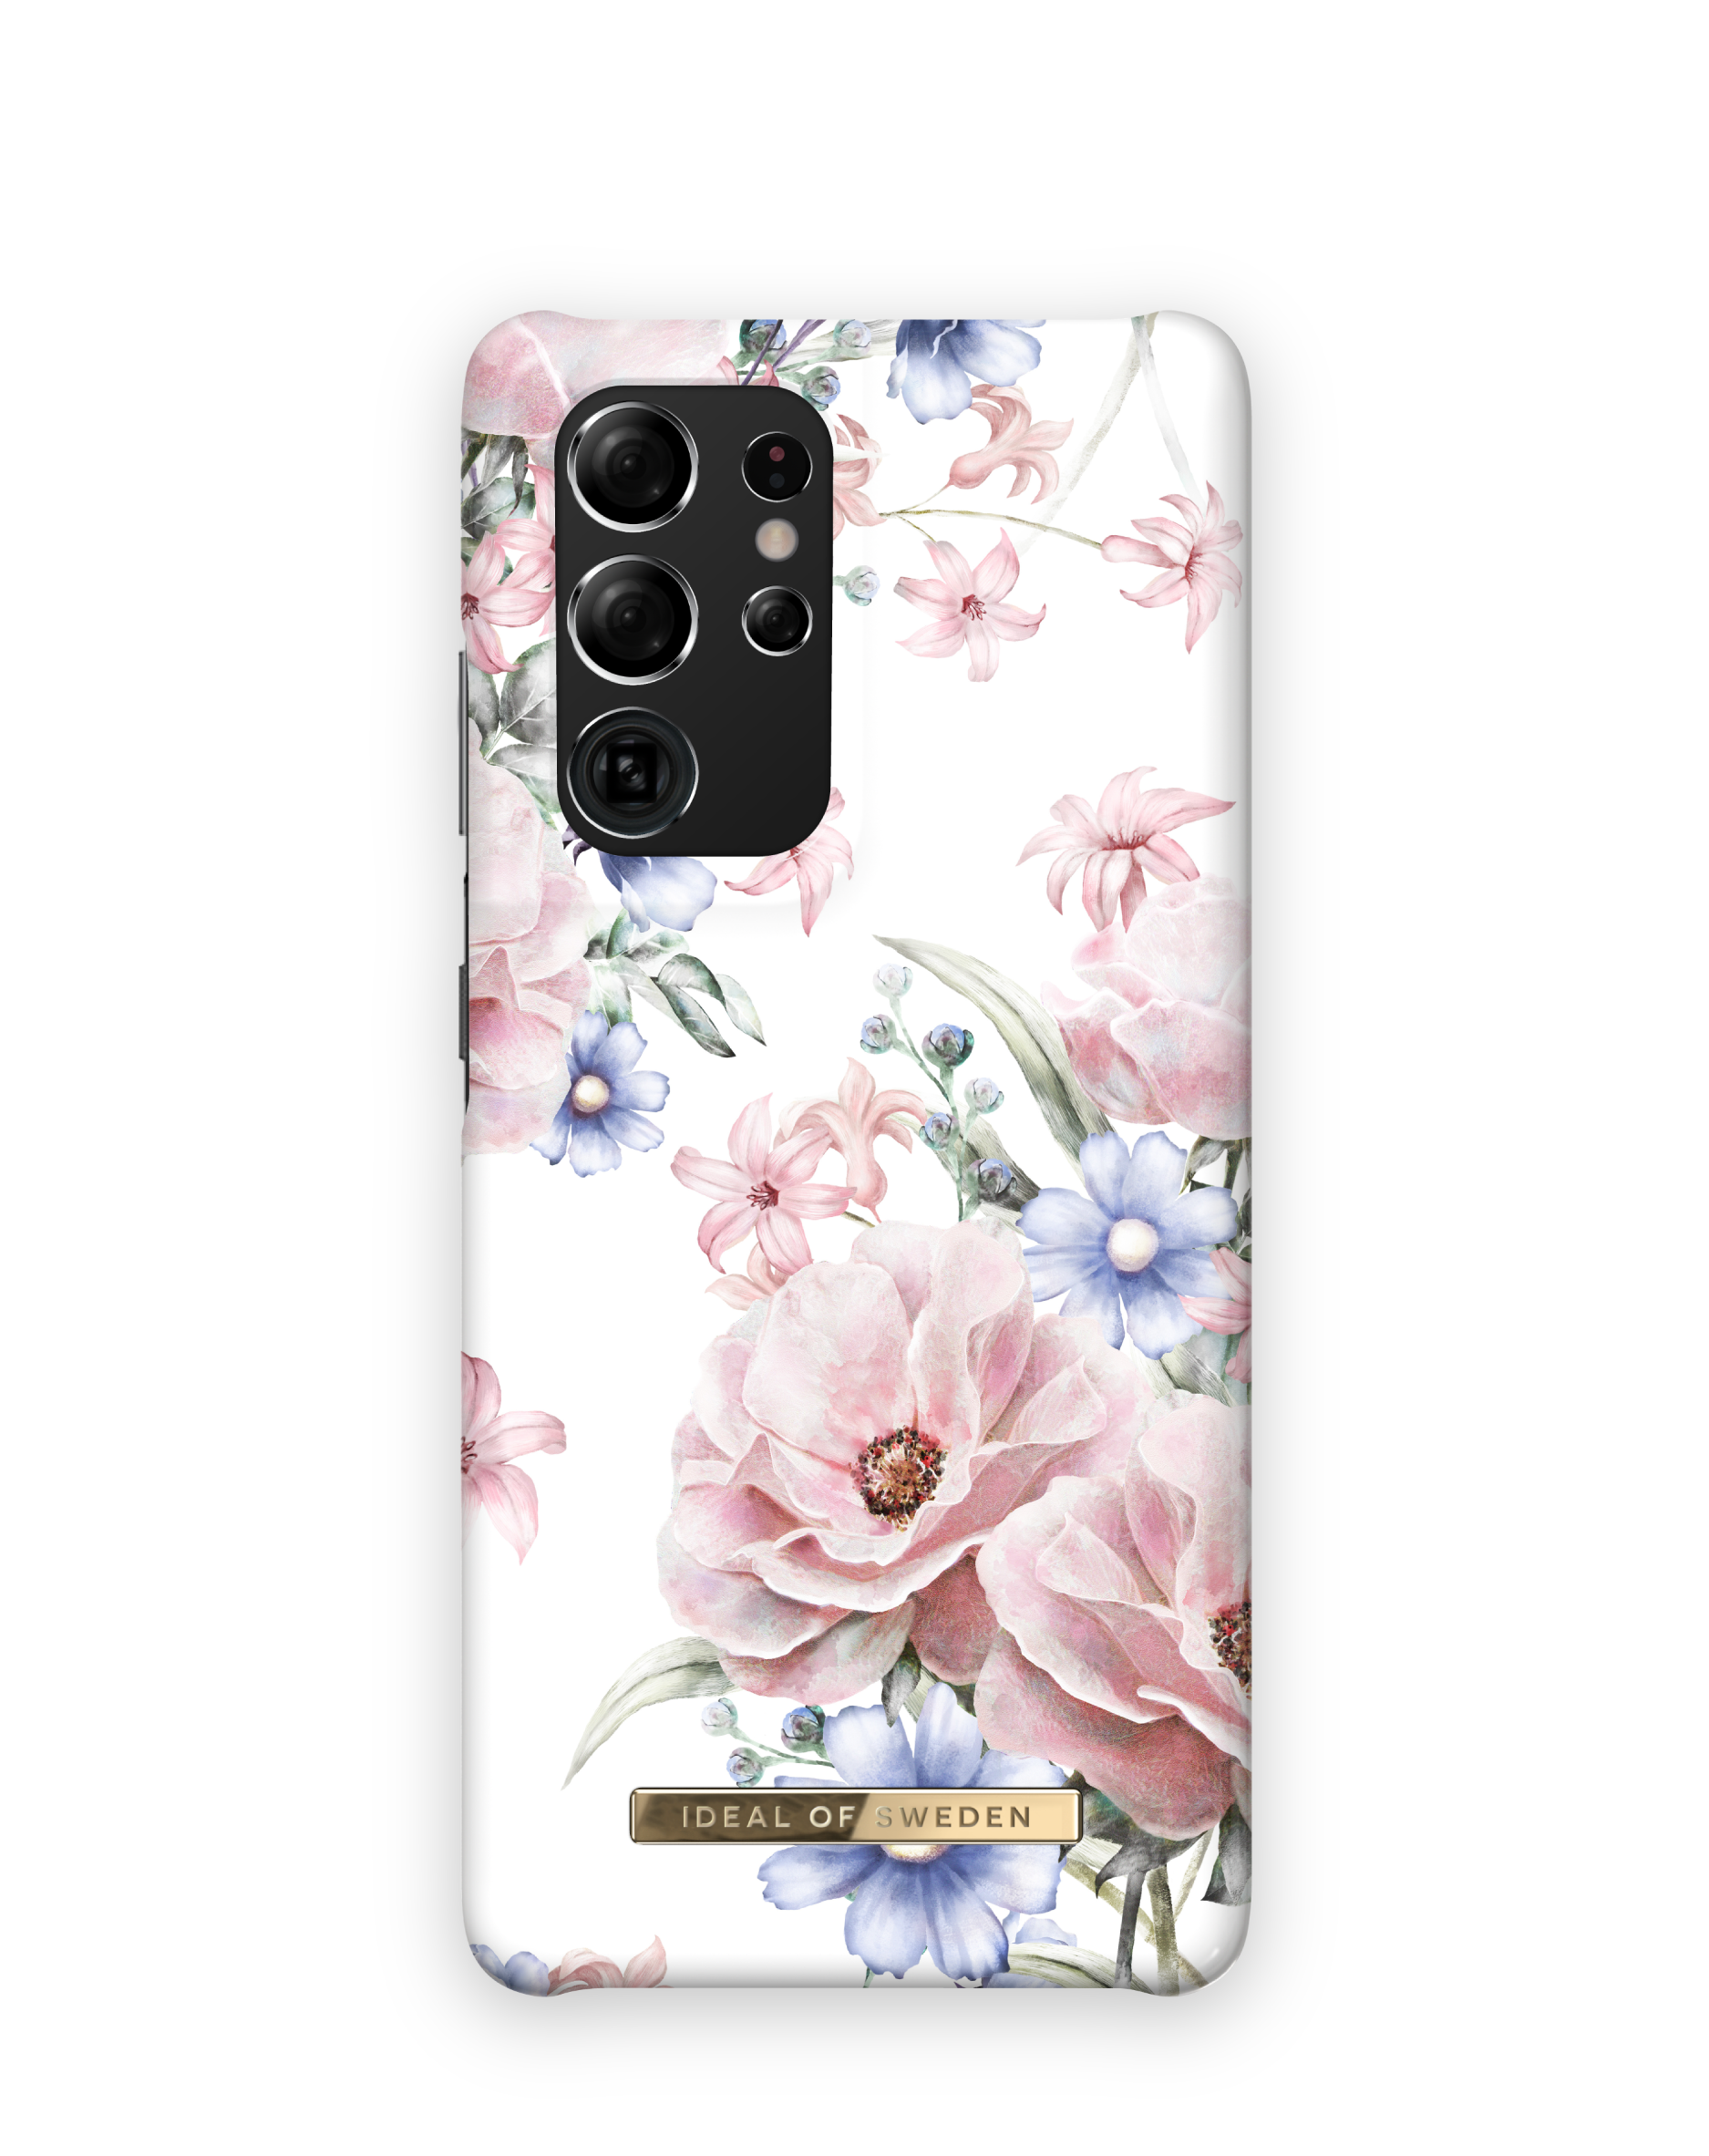 Floral Galaxy Backcover, SWEDEN IDEAL S21 Romance OF IDFCS17-S21U-58, Ultra, Samsung,